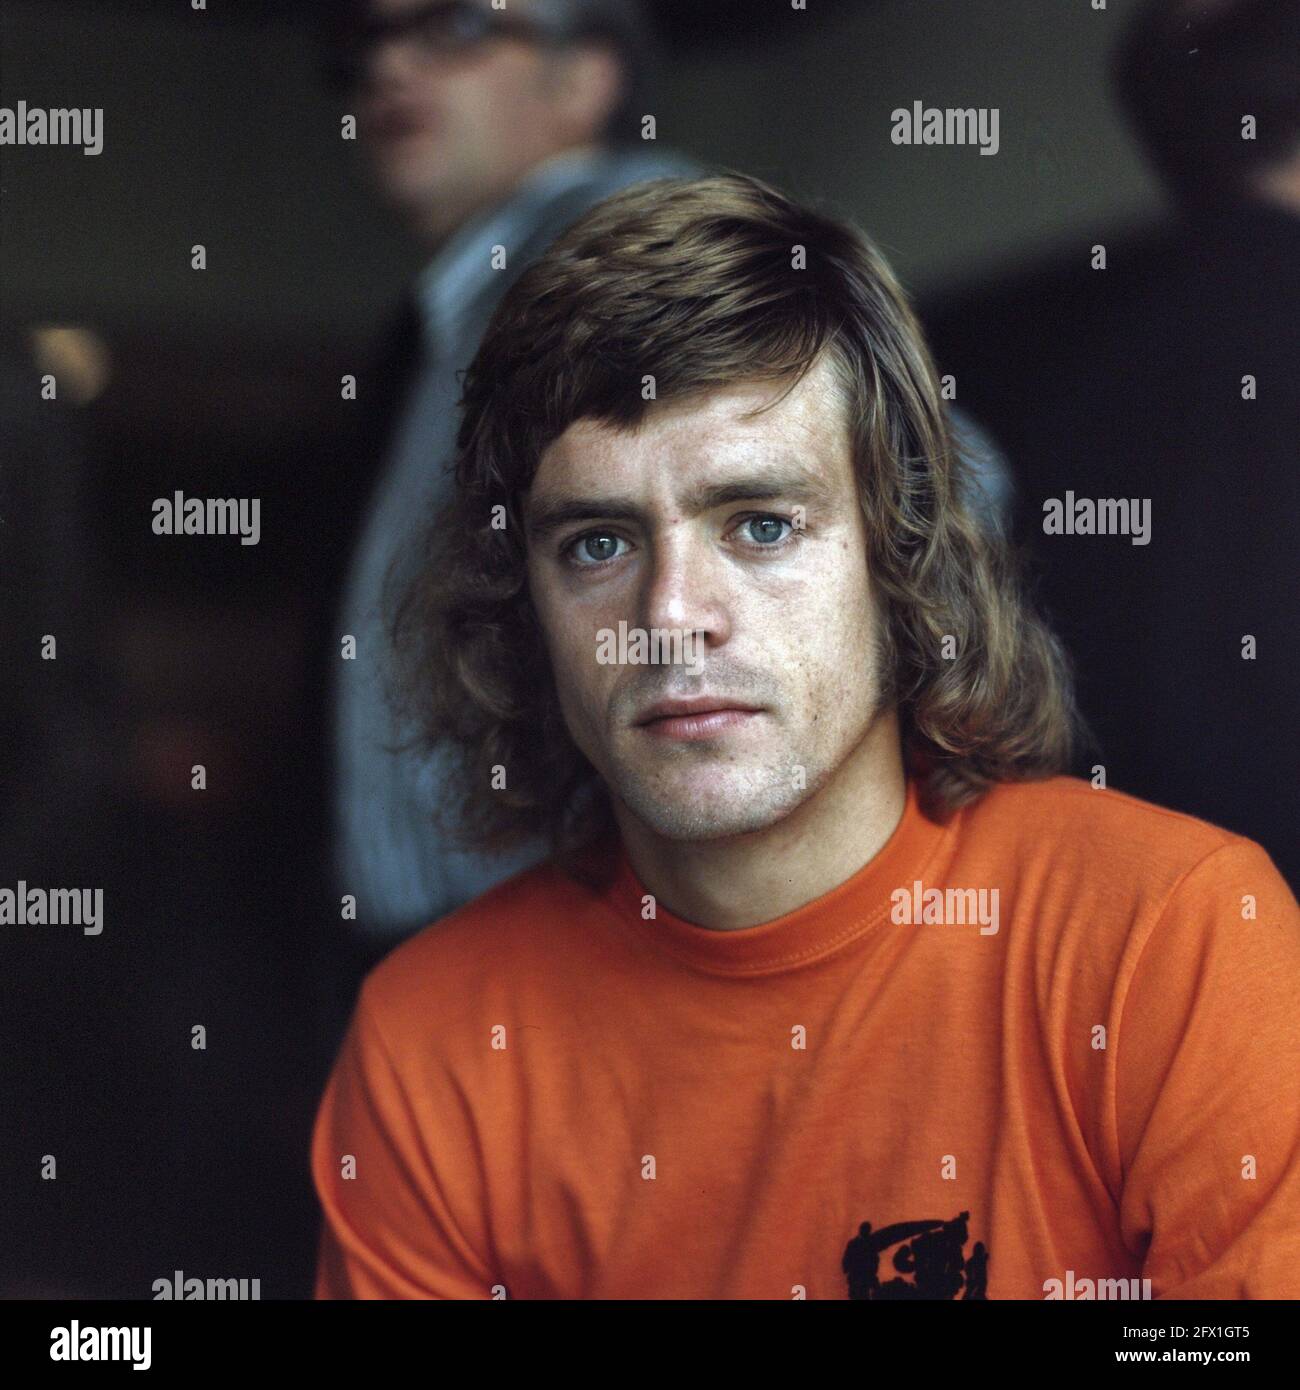 Headlines Dutch soccer players; Johnny Rep, April 30, 1974, sports, soccer players, The Netherlands, 20th century press agency photo, news to remember, documentary, historic photography 1945-1990, visual stories, human history of the Twentieth Century, capturing moments in time Stock Photo